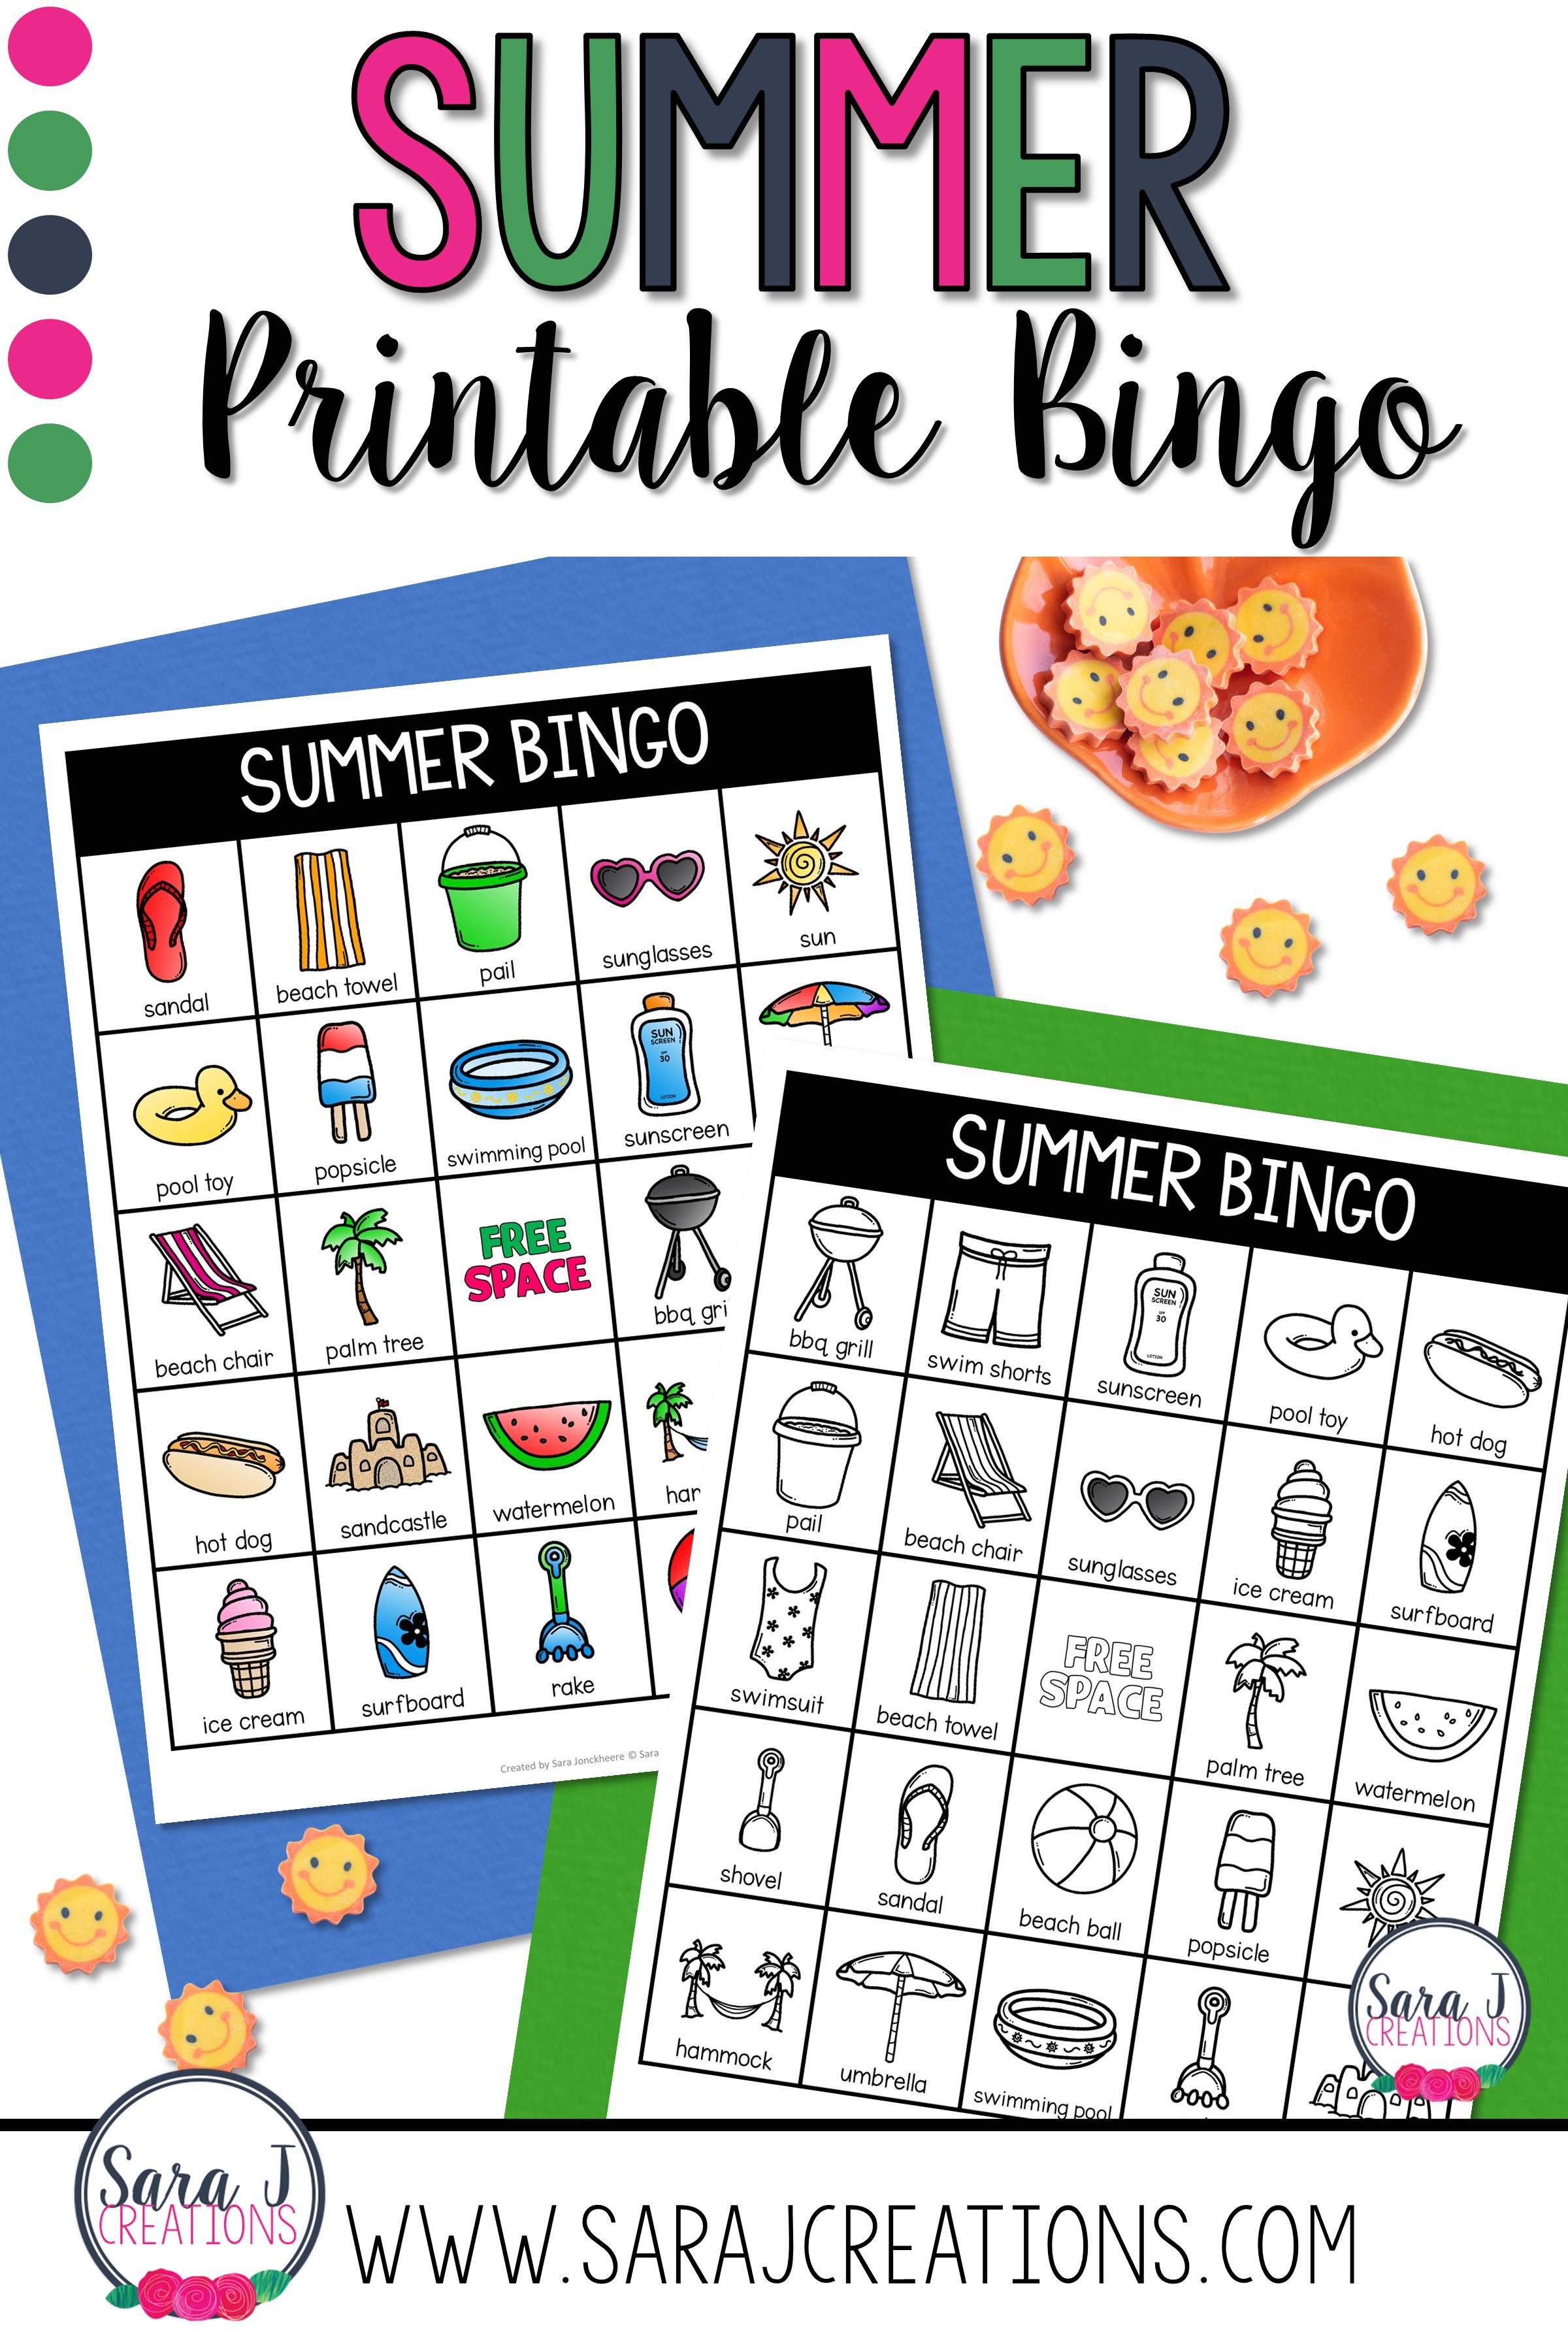 Need a little summer fun for kids?  How about summer bingo?  Perfect for the end of the school year or during the summer.  It includes 30 different boards in color and black and white.  Just print and play!